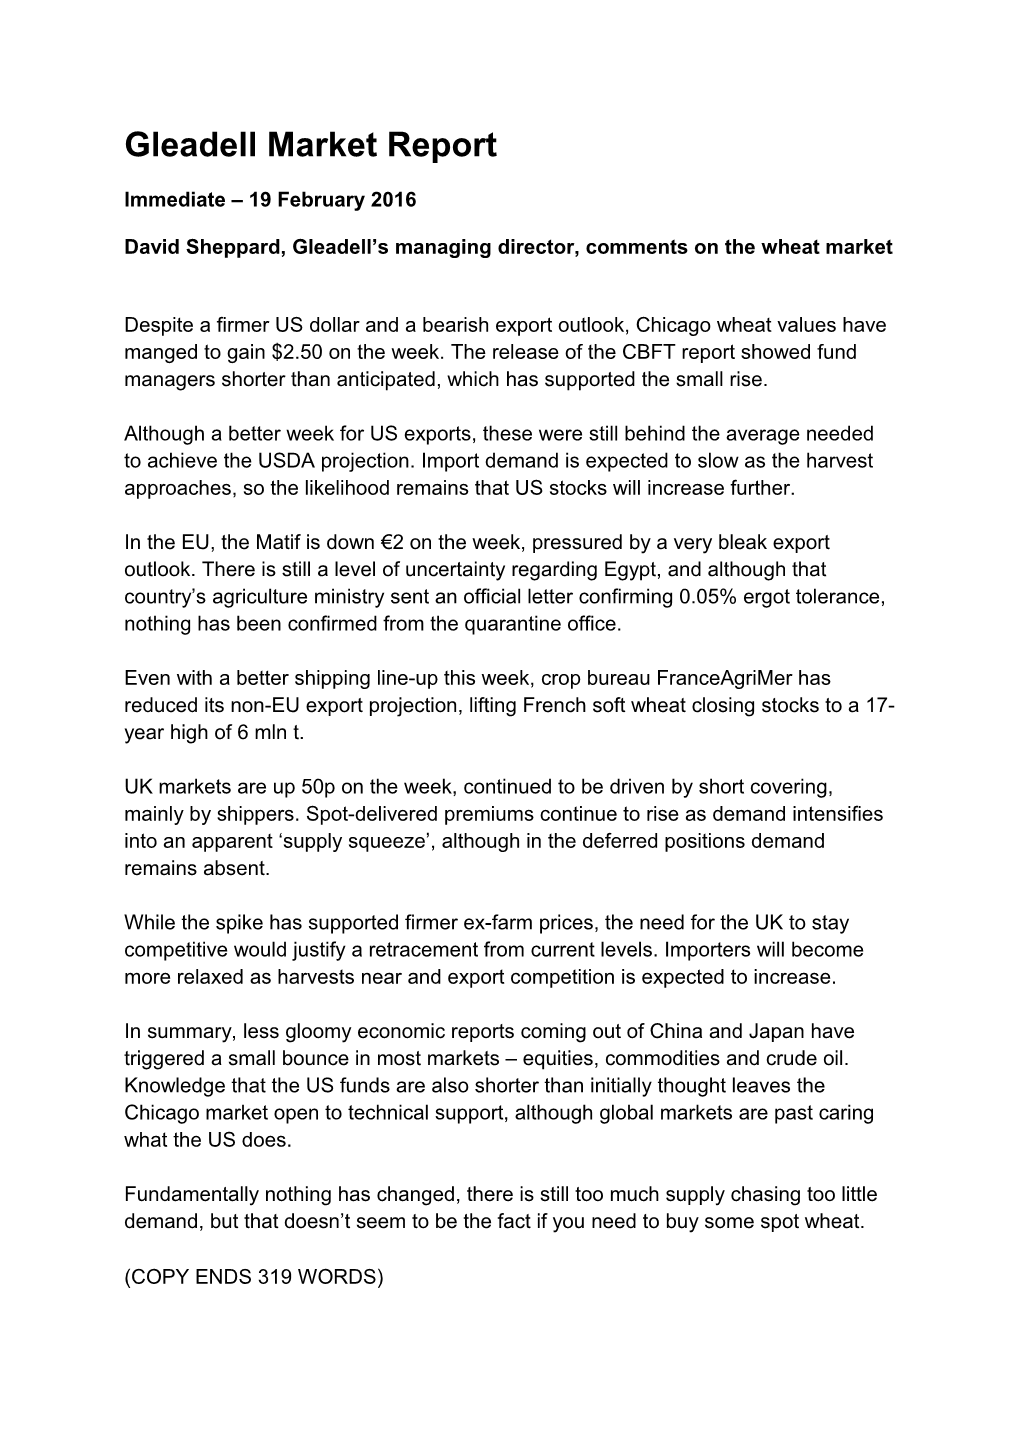 David Sheppard, Gleadell S Managing Director, Comments on the Wheat Market